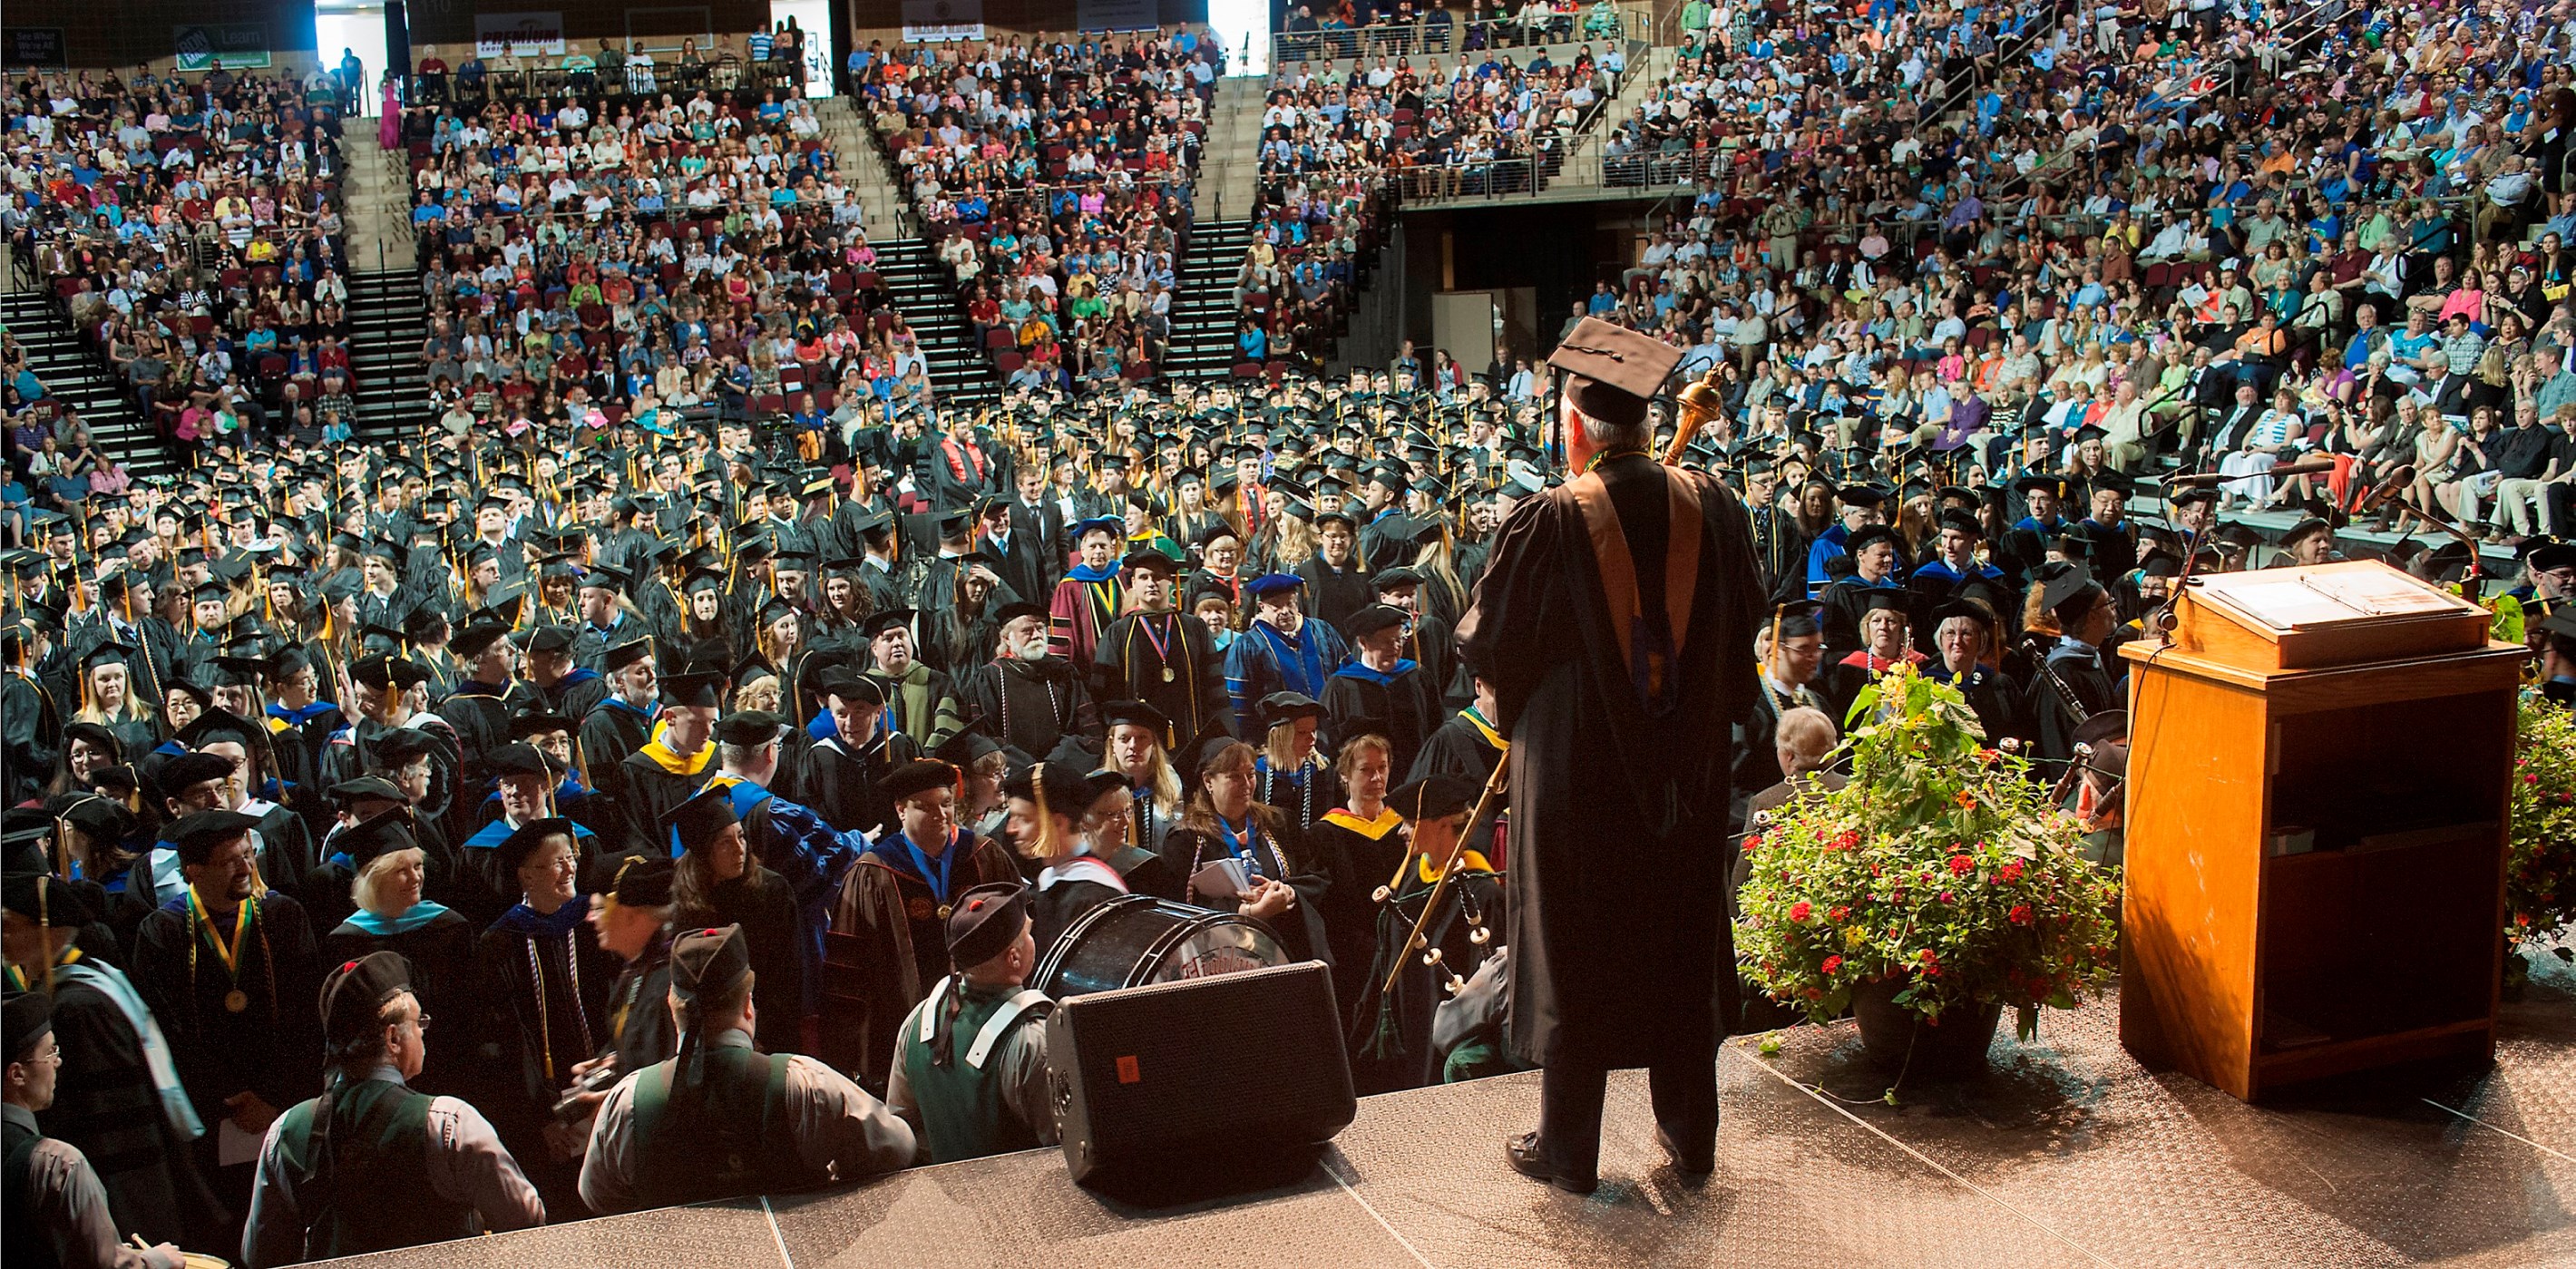 Husson University’s 117th Annual Commencement Exercises will take place at the Cross Insurance Center in Bangor, Maine.